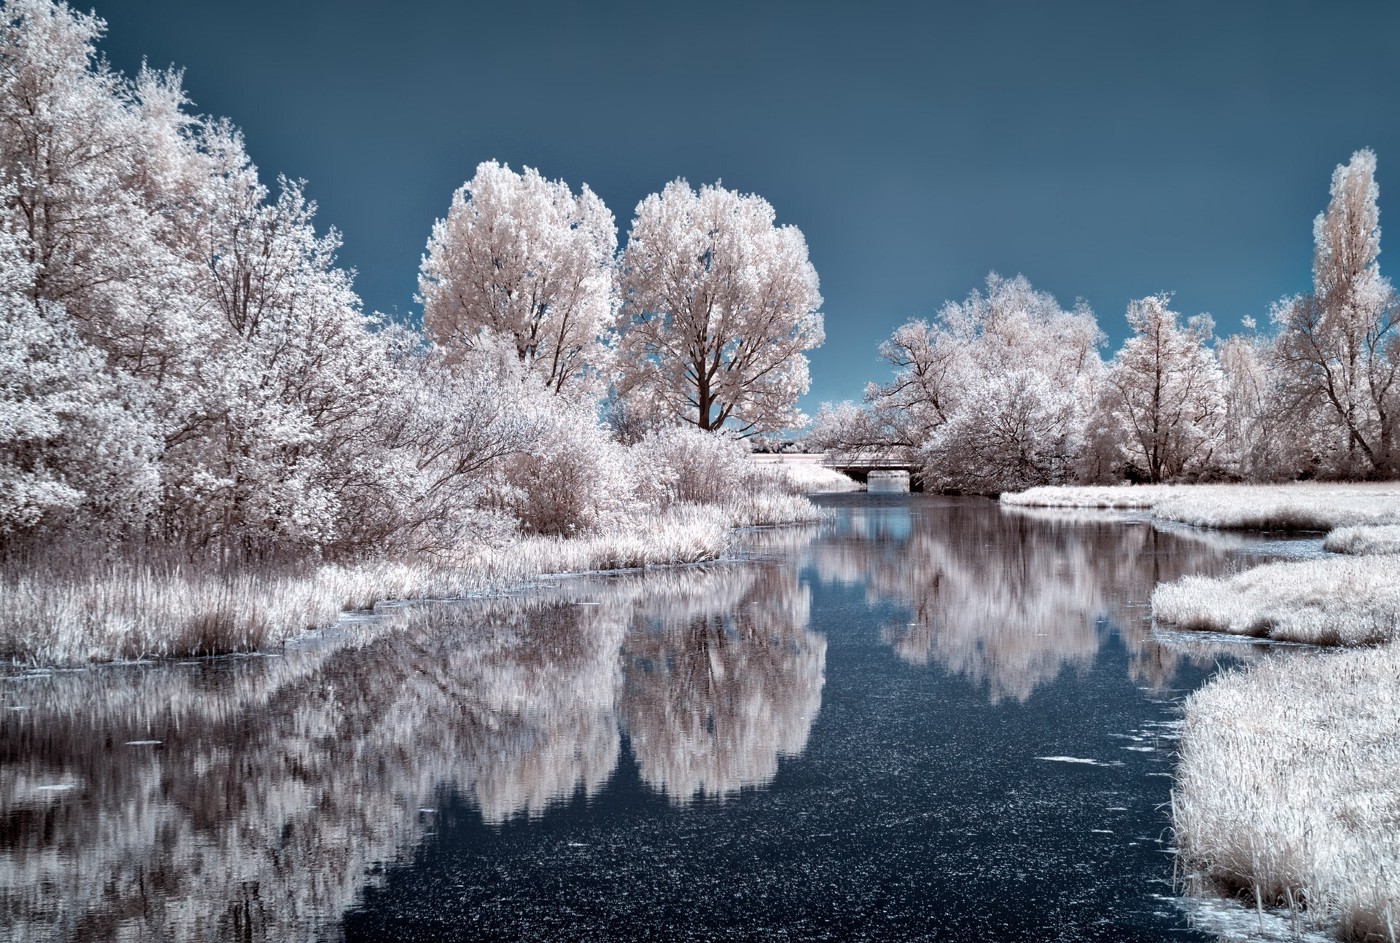 Lightroom Editing Tips to Transform Your Winter Photo. by David Sornberger Photography